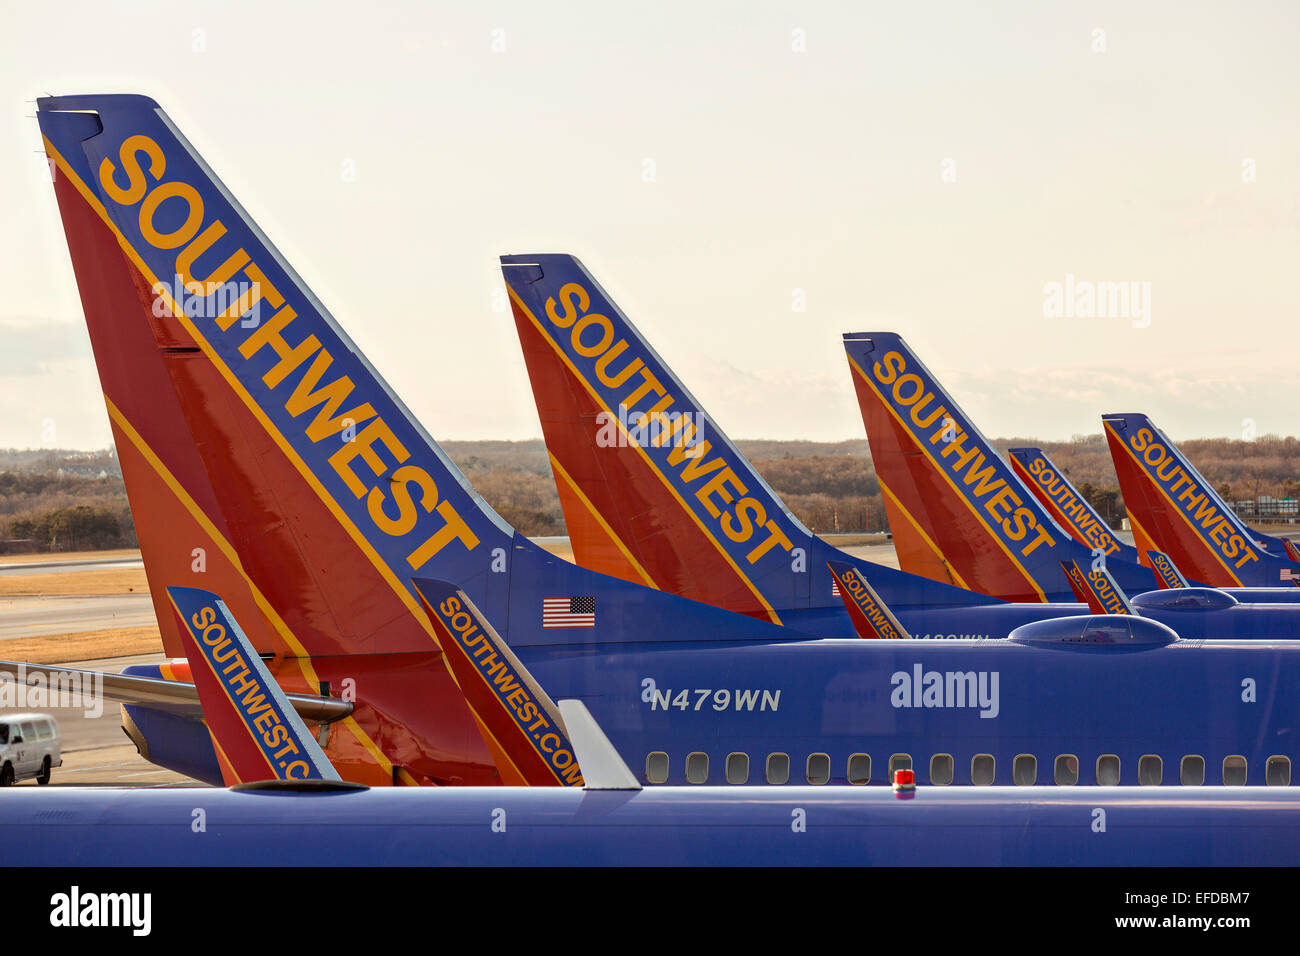 Southwest Airlines Boeing 737 aircraft line up at the gate in Memphis, TN. Stock Photo